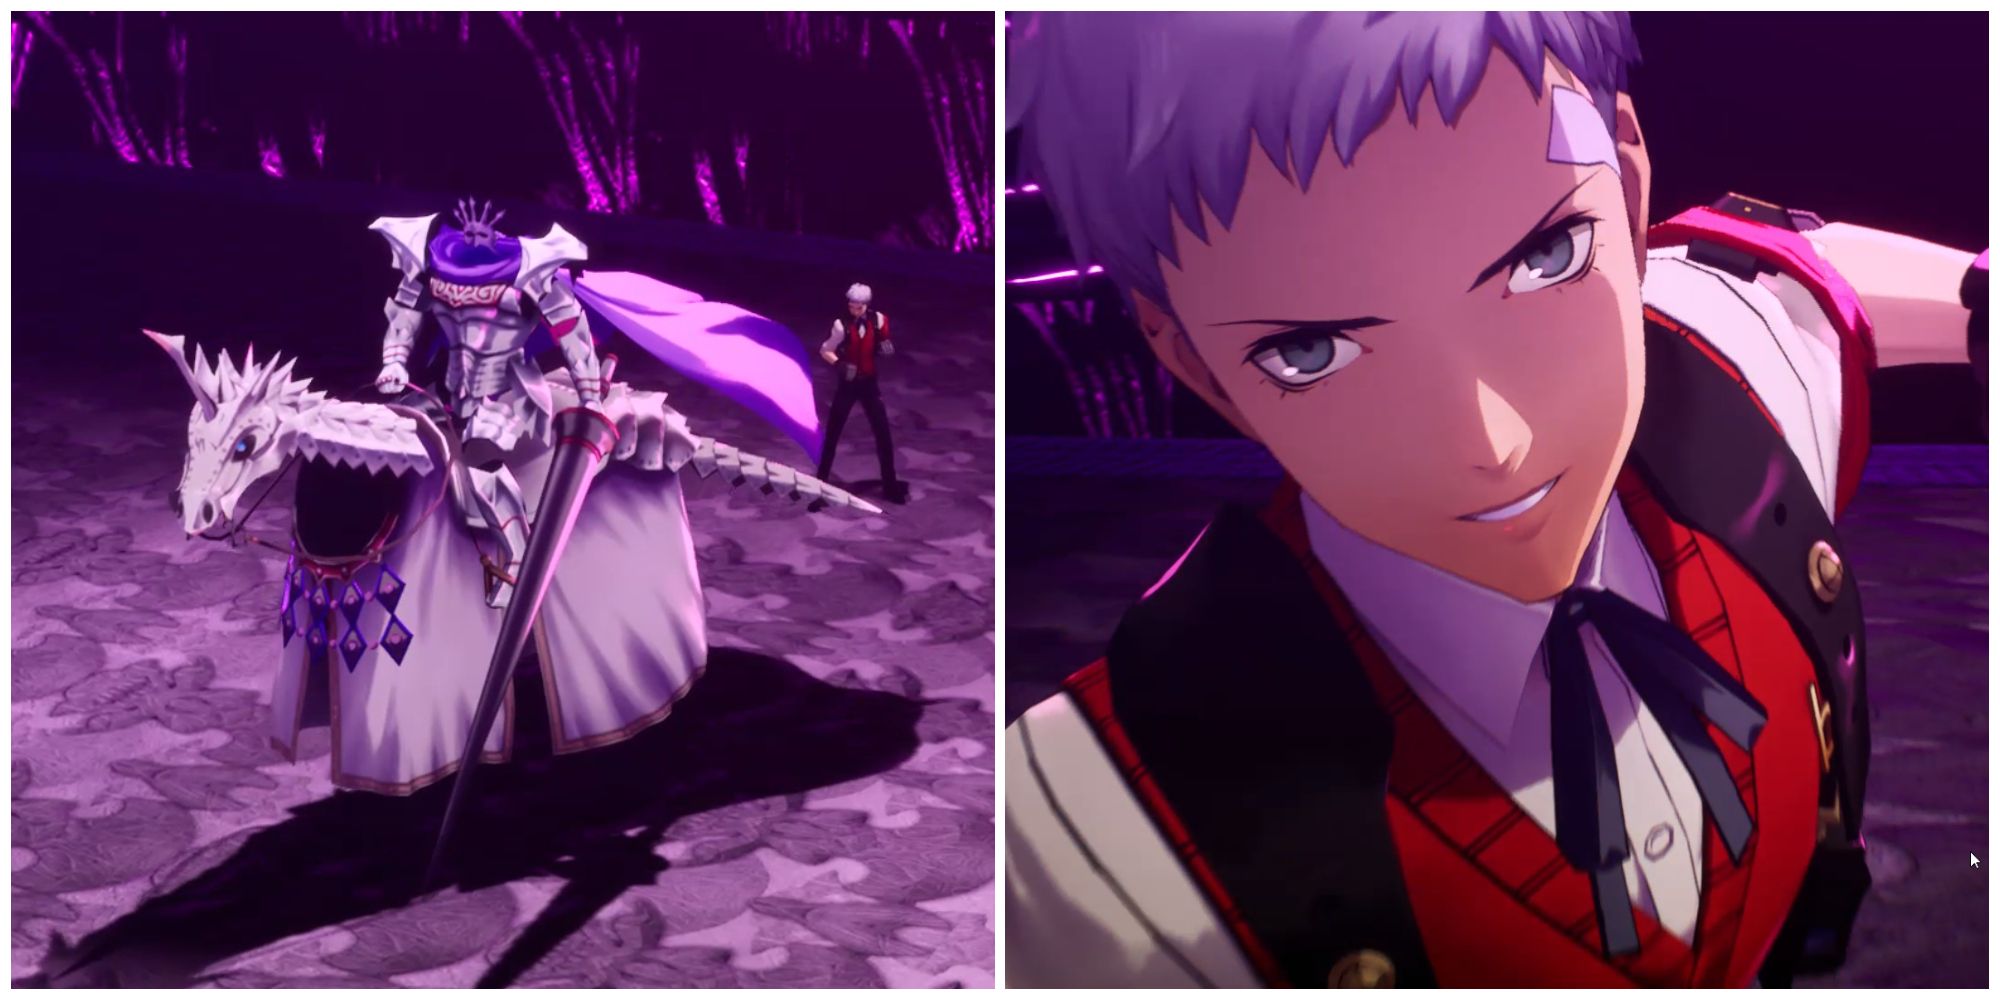 Split image of the Fleetfooted Cavalry boss and Akihiko Sanada using an attack in Persona 3 Reload